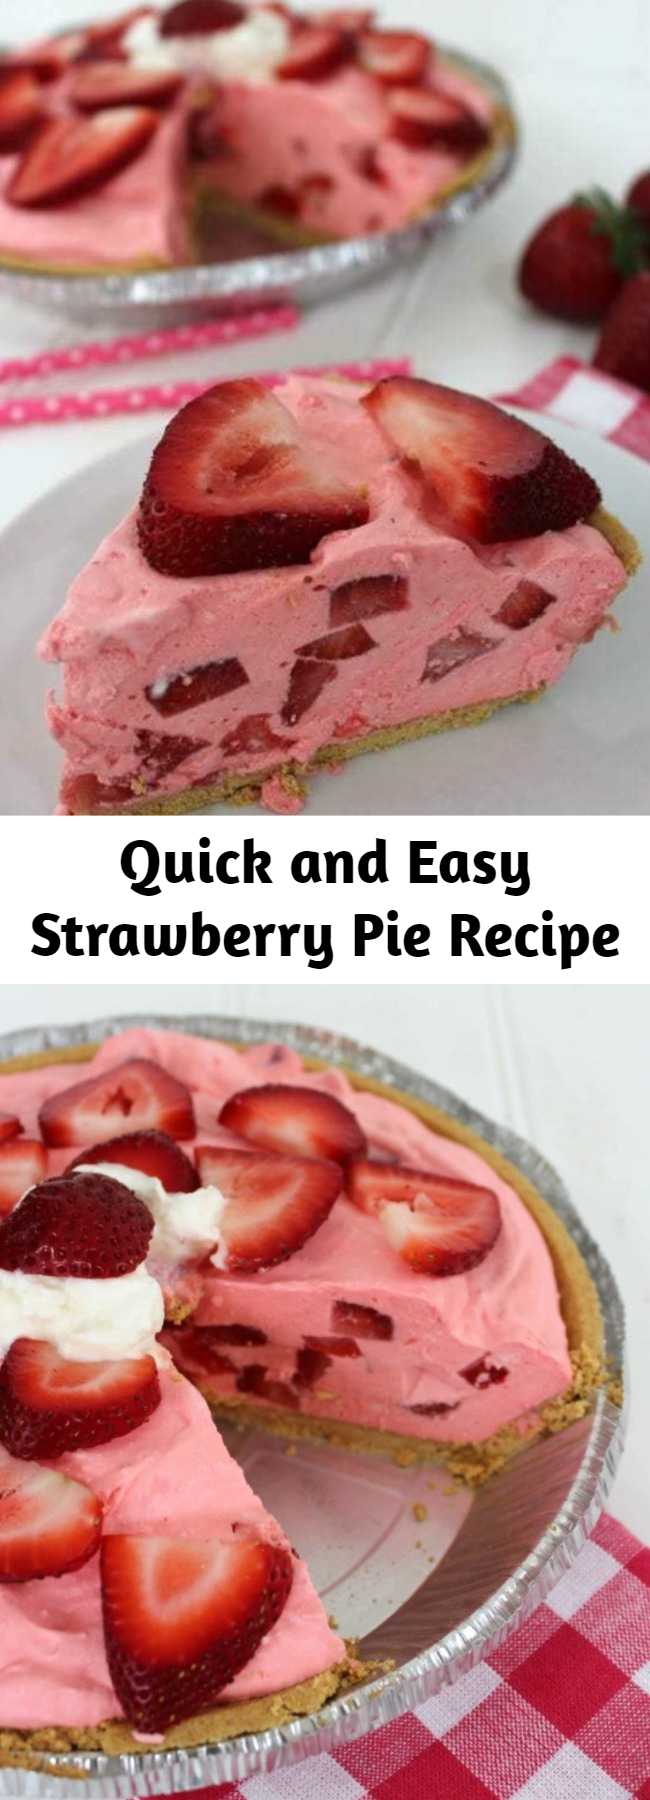 Quick and Easy Strawberry Pie Recipe - Super Simple and comes together quickly. Makes for a great summer BBQ dessert.